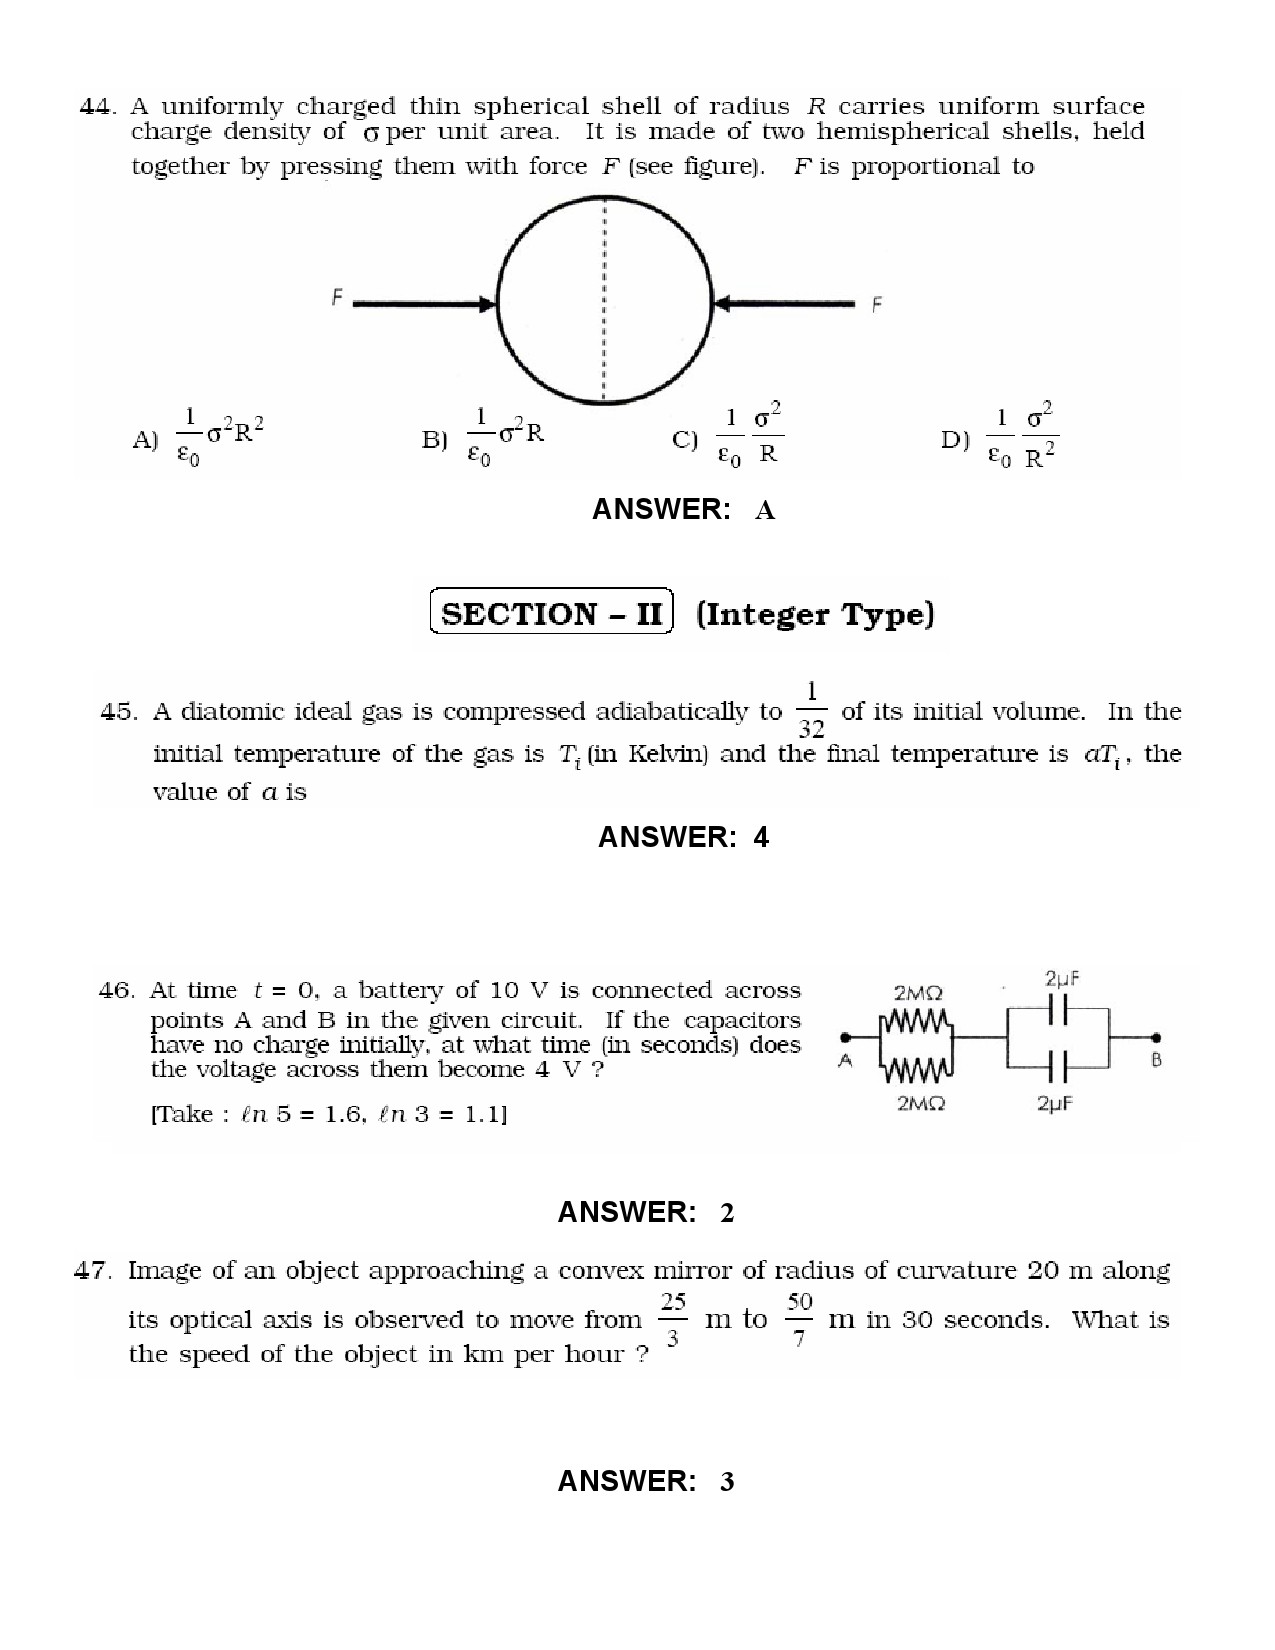 JEE Exam Question Paper 2010 Paper 2 17